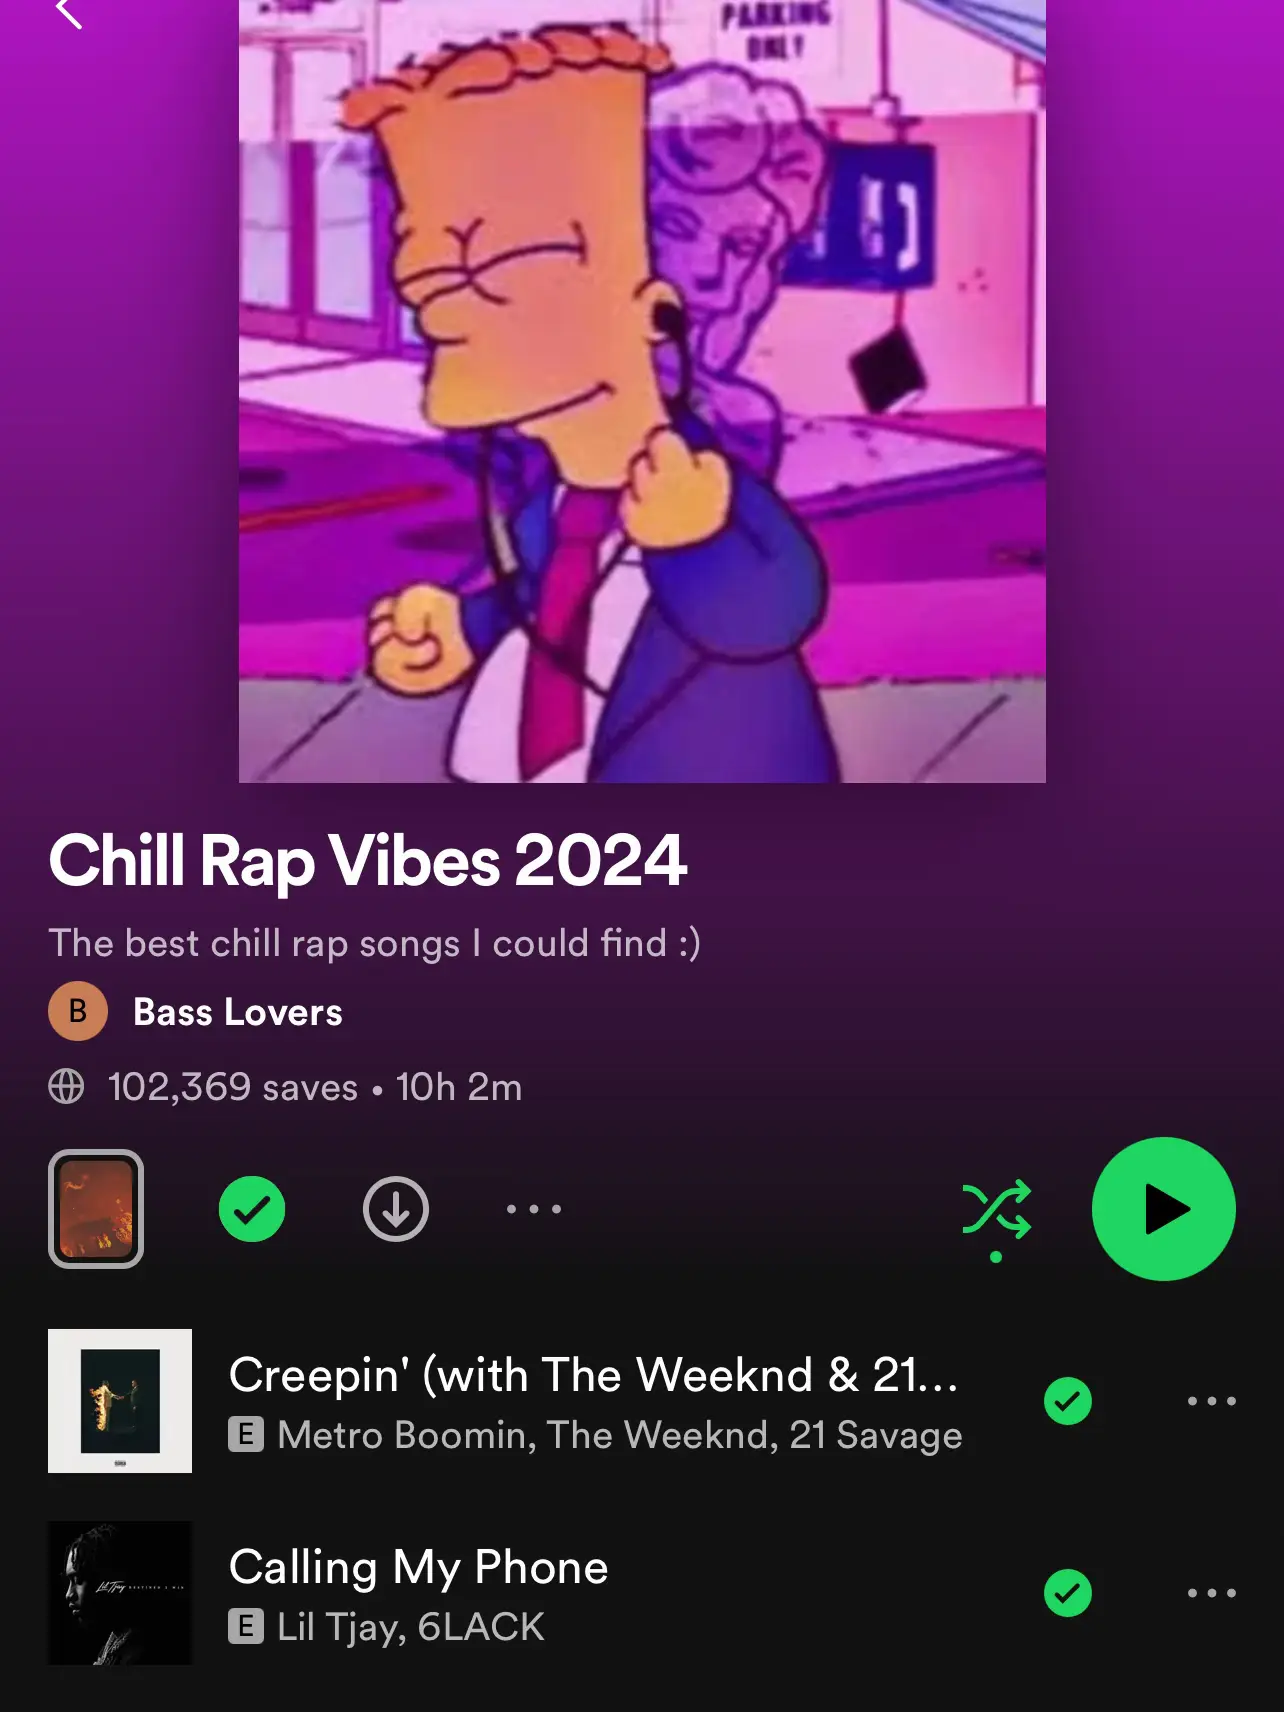  A list of chill rap songs